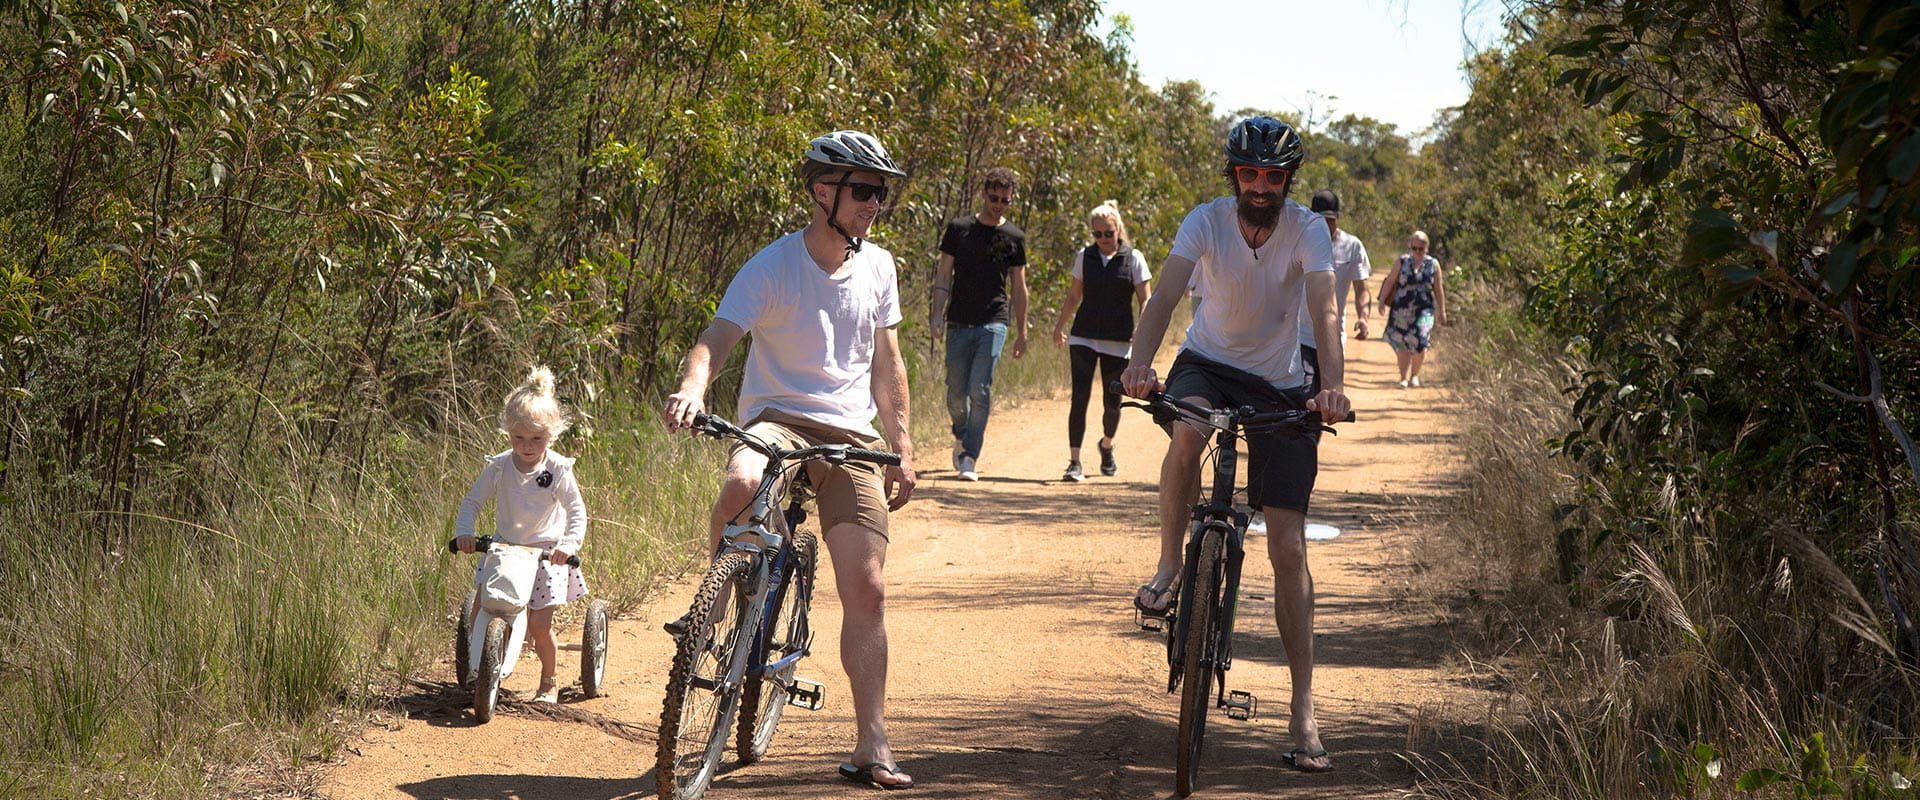 A group a people ride bikes and walk along a trail surrounded by native bushlands